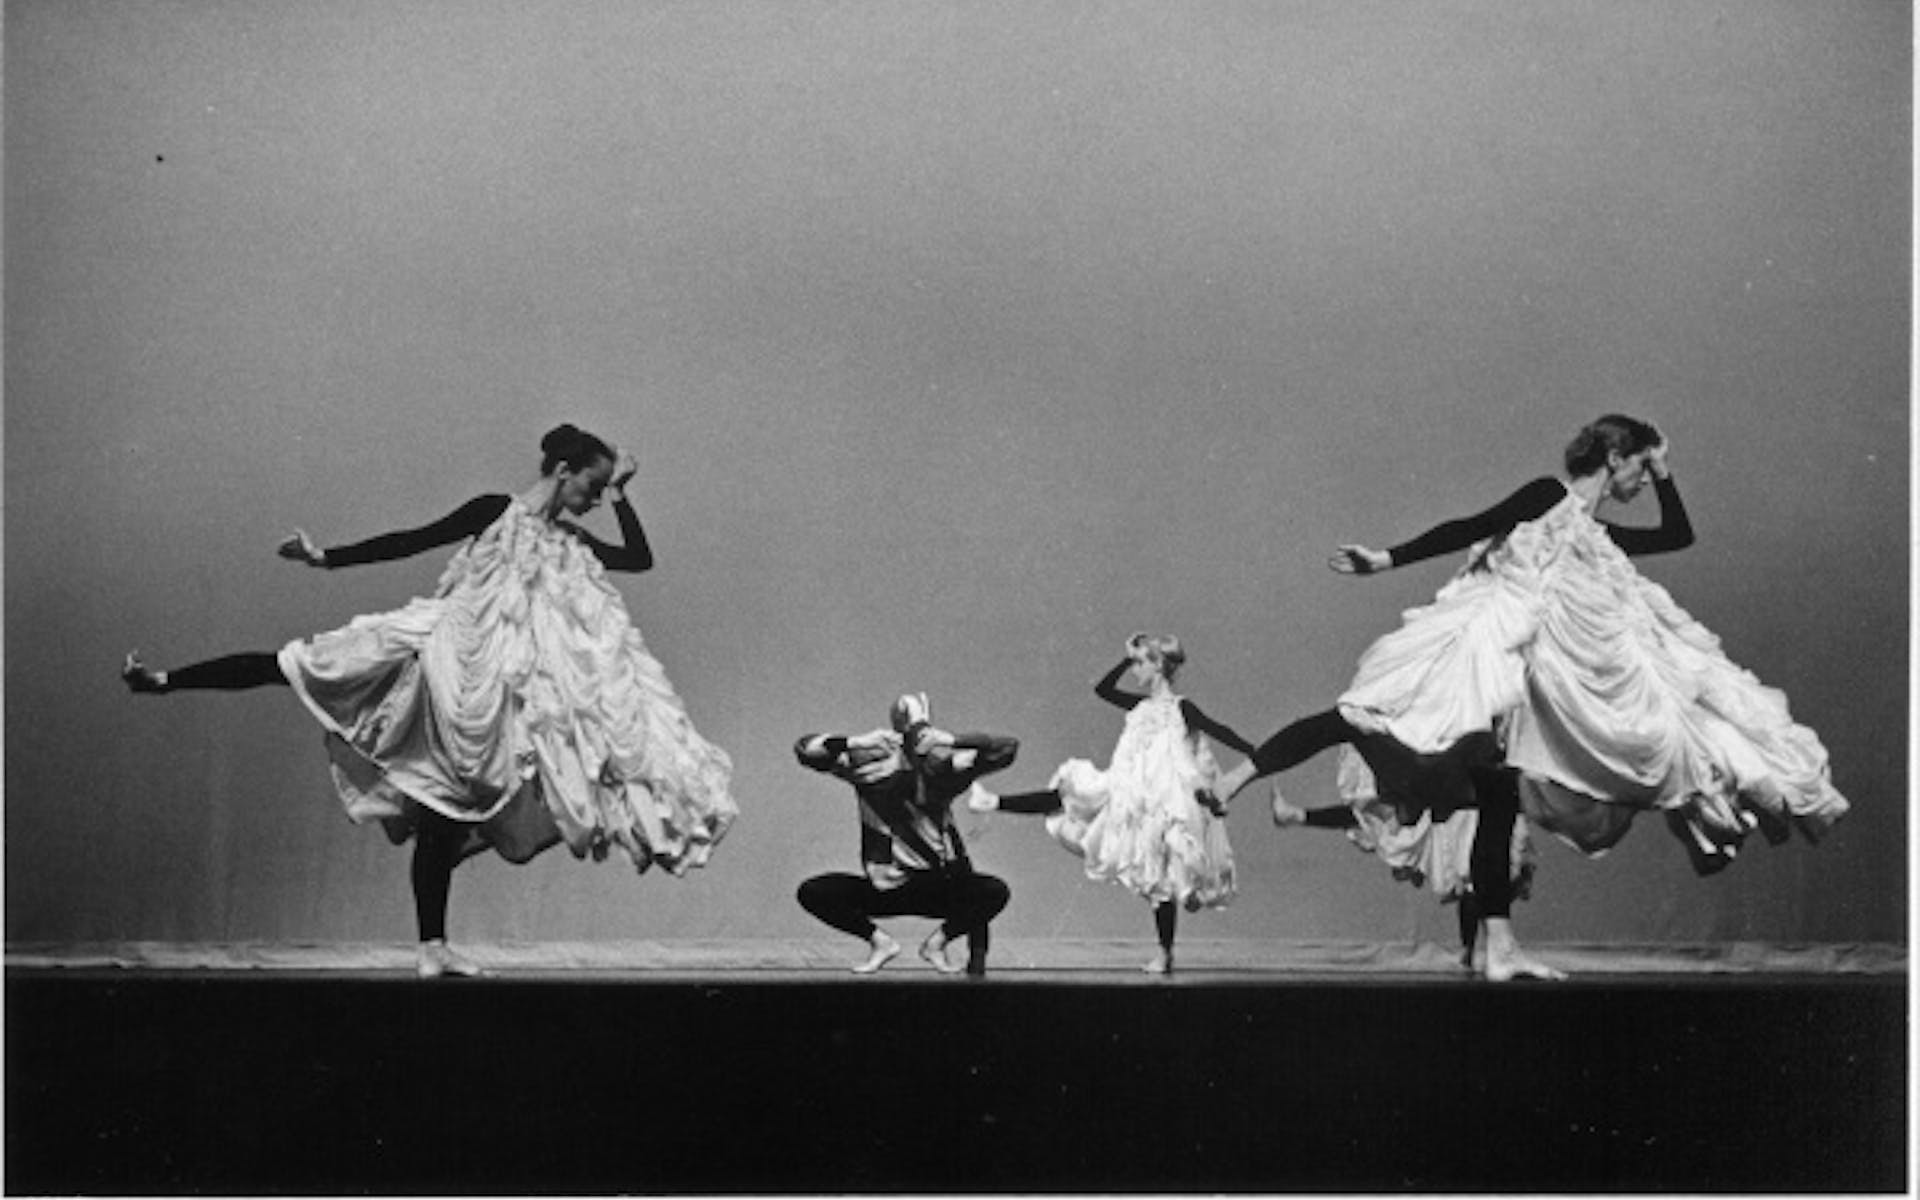 Merce Cunningham Dance Company performing Antic Meet (1958), with costumes and décor by Robert Rauschenberg